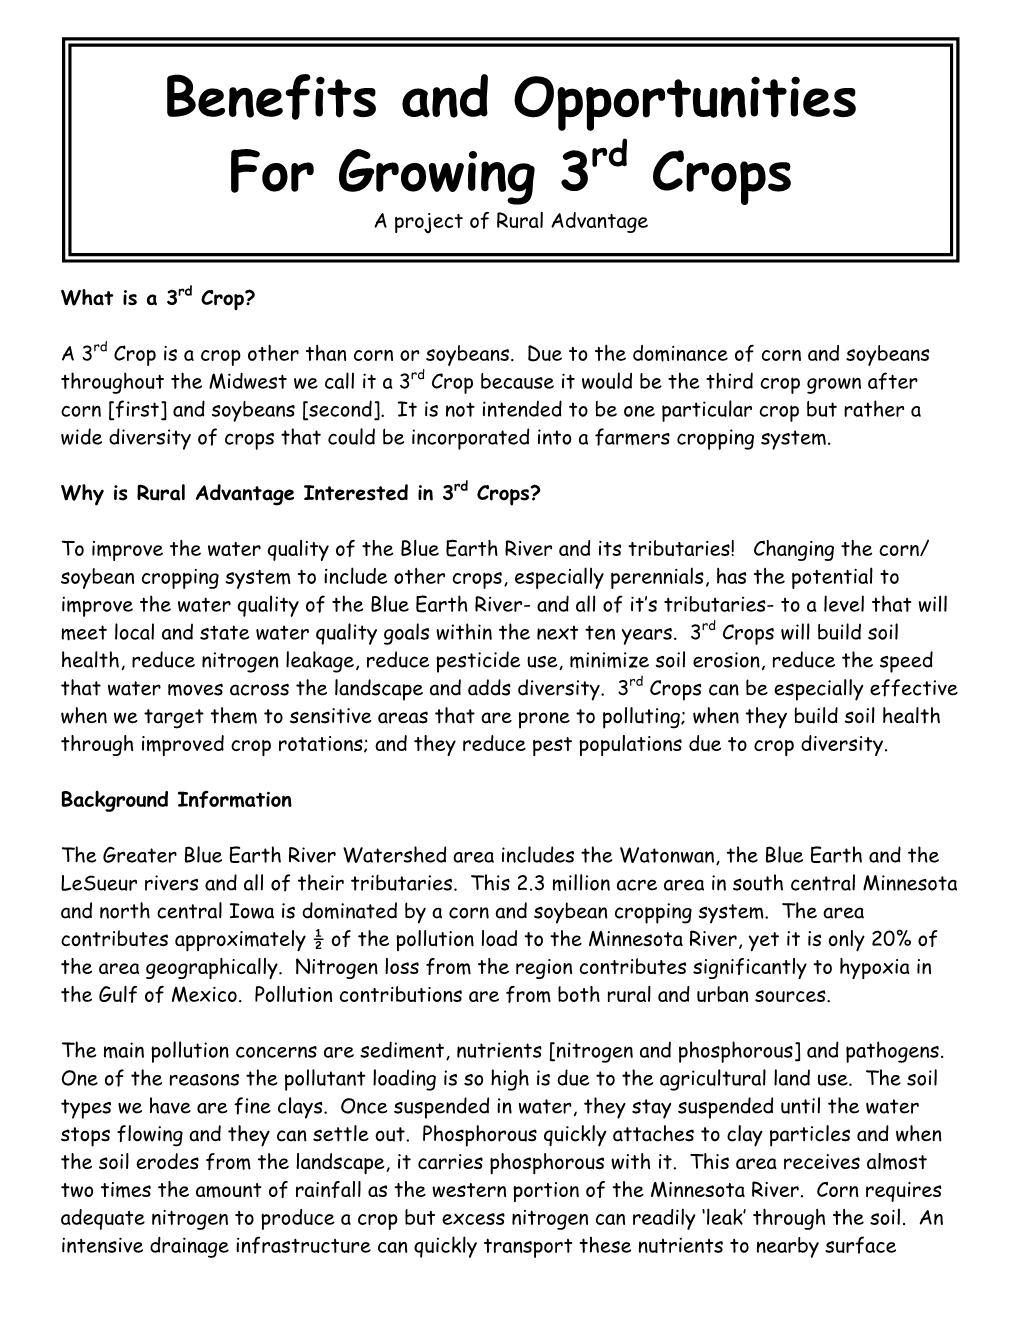 Benefits and Opportunities for Growing 3Rd Crops